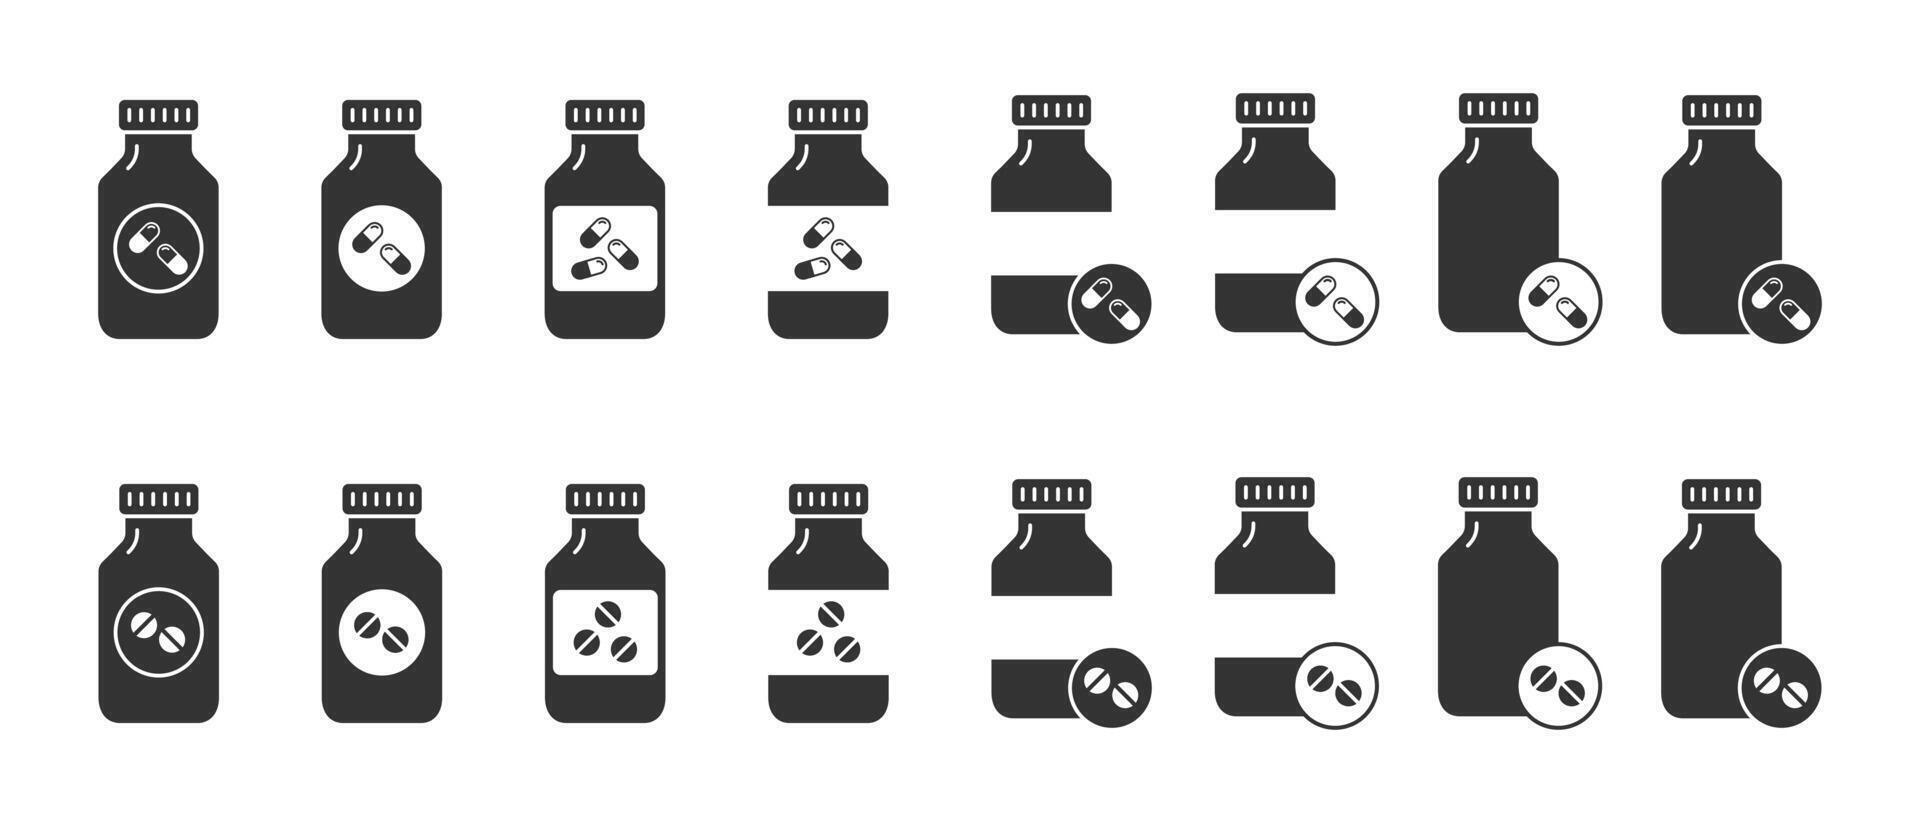 Pill bottle icon set. Medicine icon. Capsule and tablet symbols. Flat vector illustration.